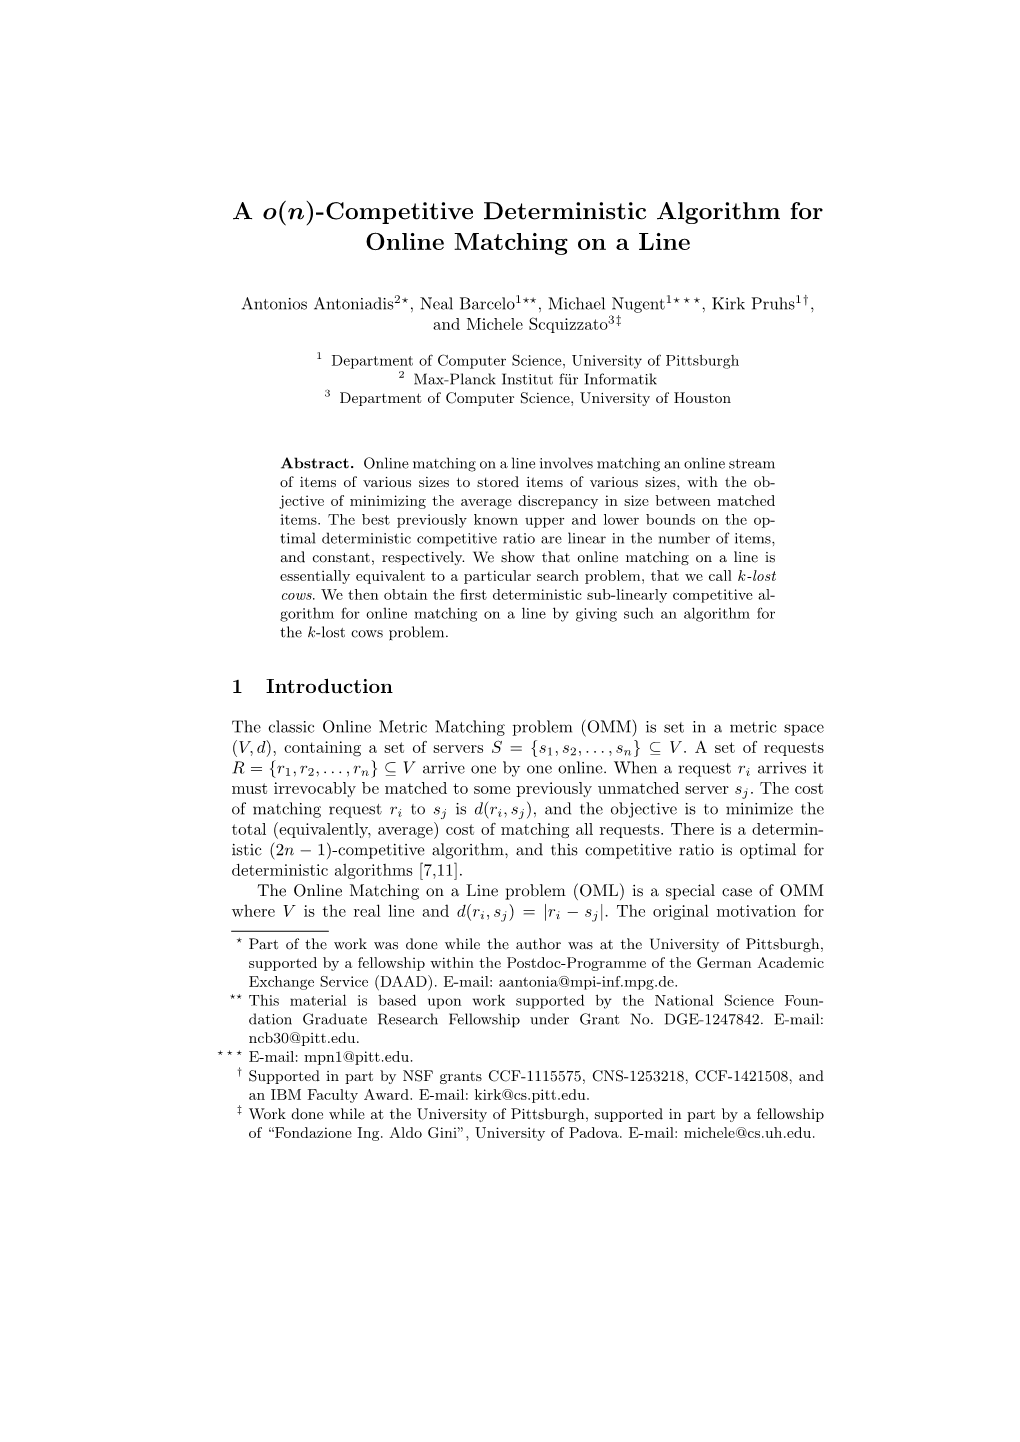 Competitive Deterministic Algorithm for Online Matching on a Line